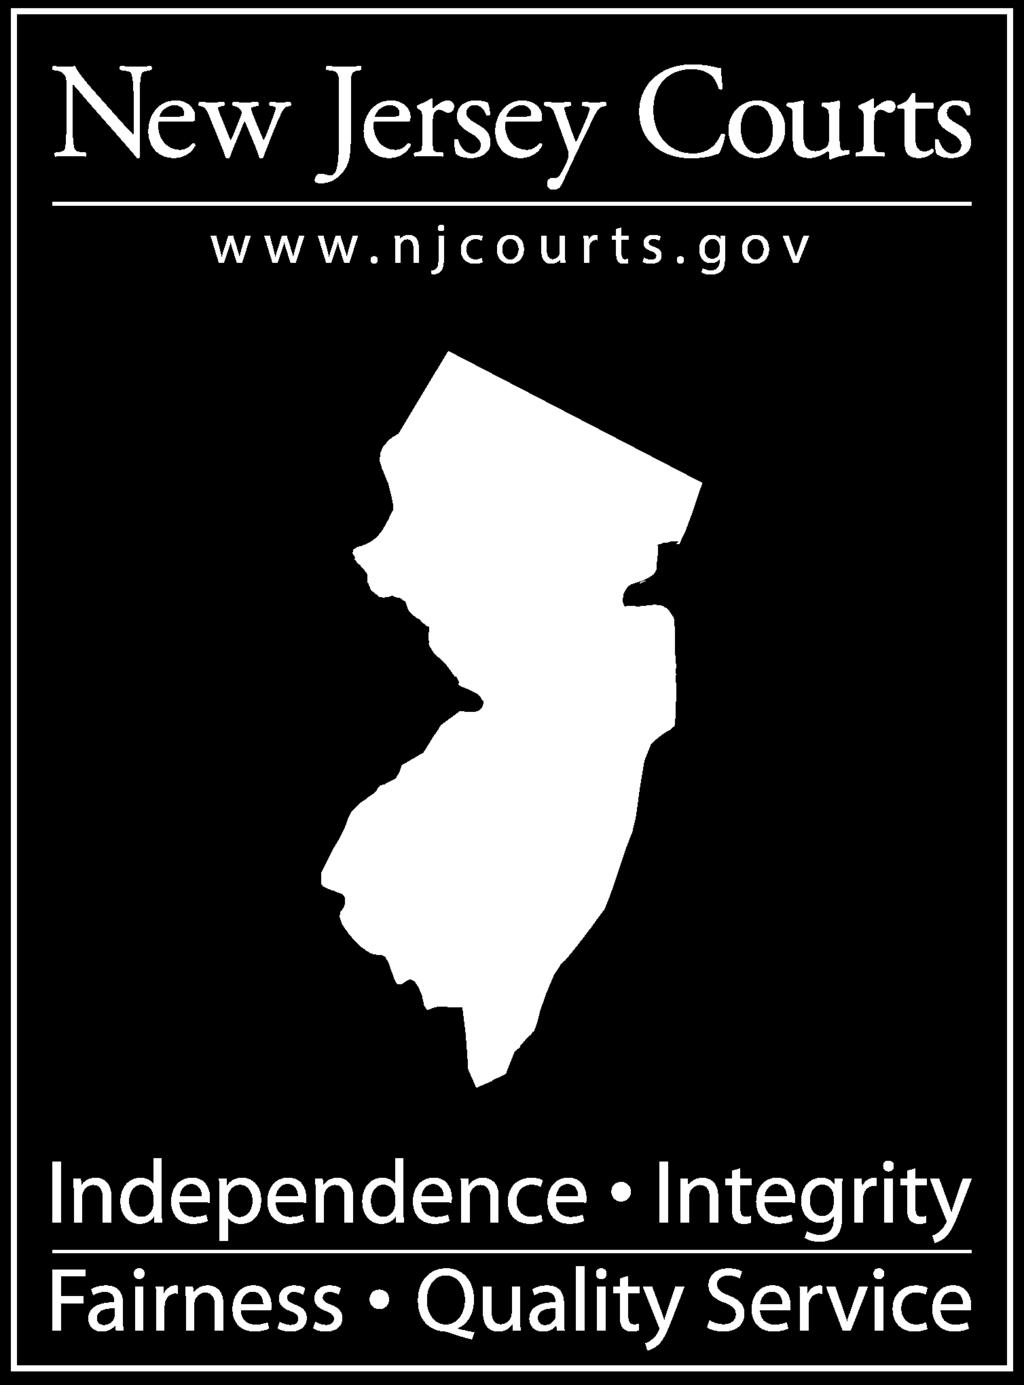 New Jersey Judiciary Special Civil A Guide to the Court